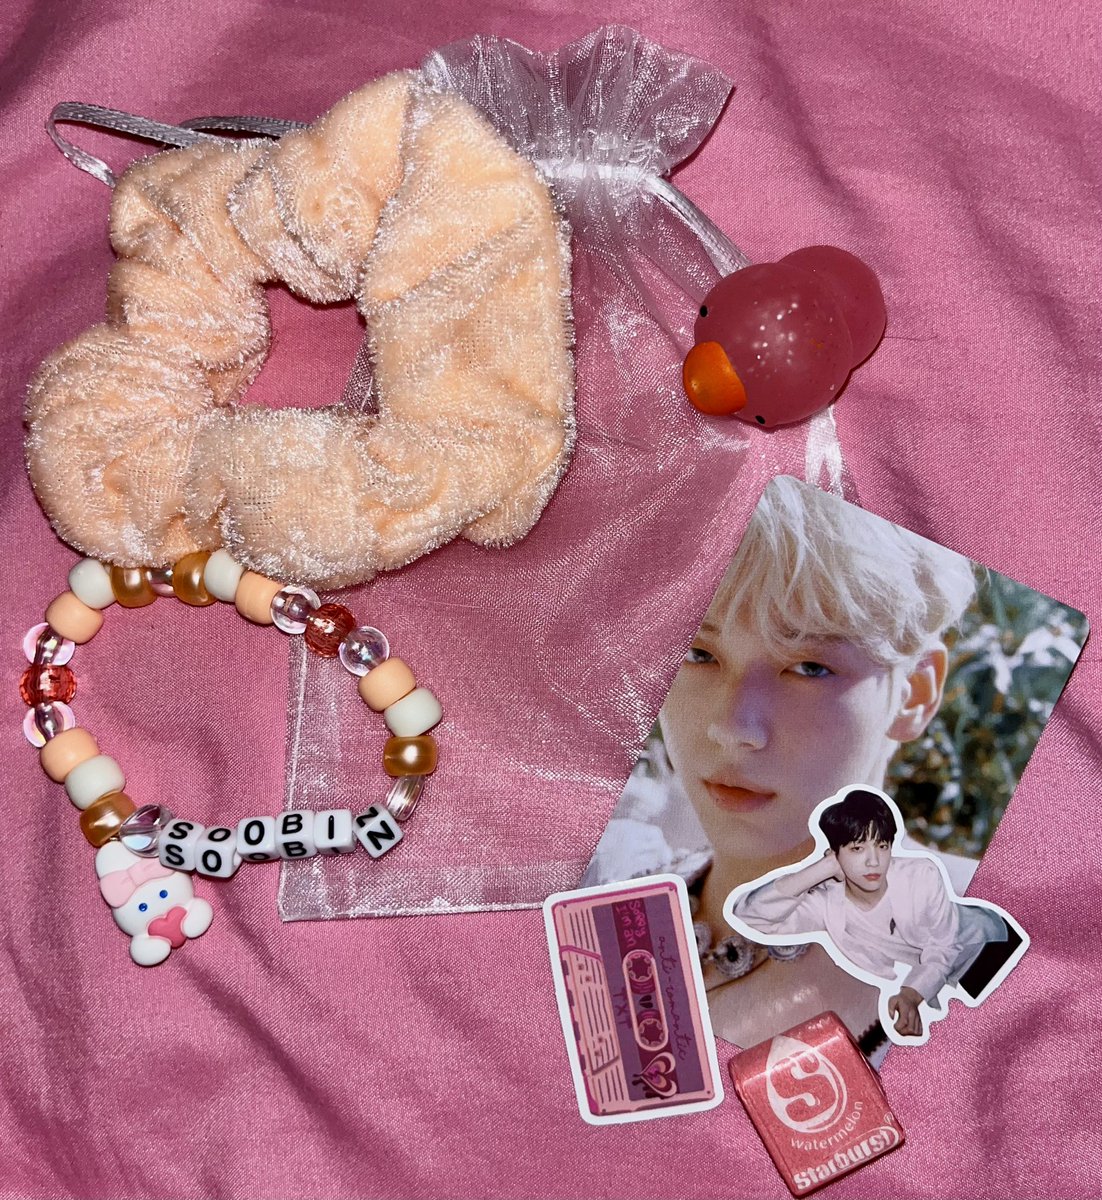 moas! here’s an updated example of our freebies for txt in duluth (atlanta) days 1 & 2! if you’d like to trade/reserve one lmk! we have member specific & ot5 in limited quantities! just dm me which member you’d like 😊🤍

#TXT #TOMORROW_X_TOGETHER 
#TXT_ASM_TOUR #ACT_SWEET_MIRAGE